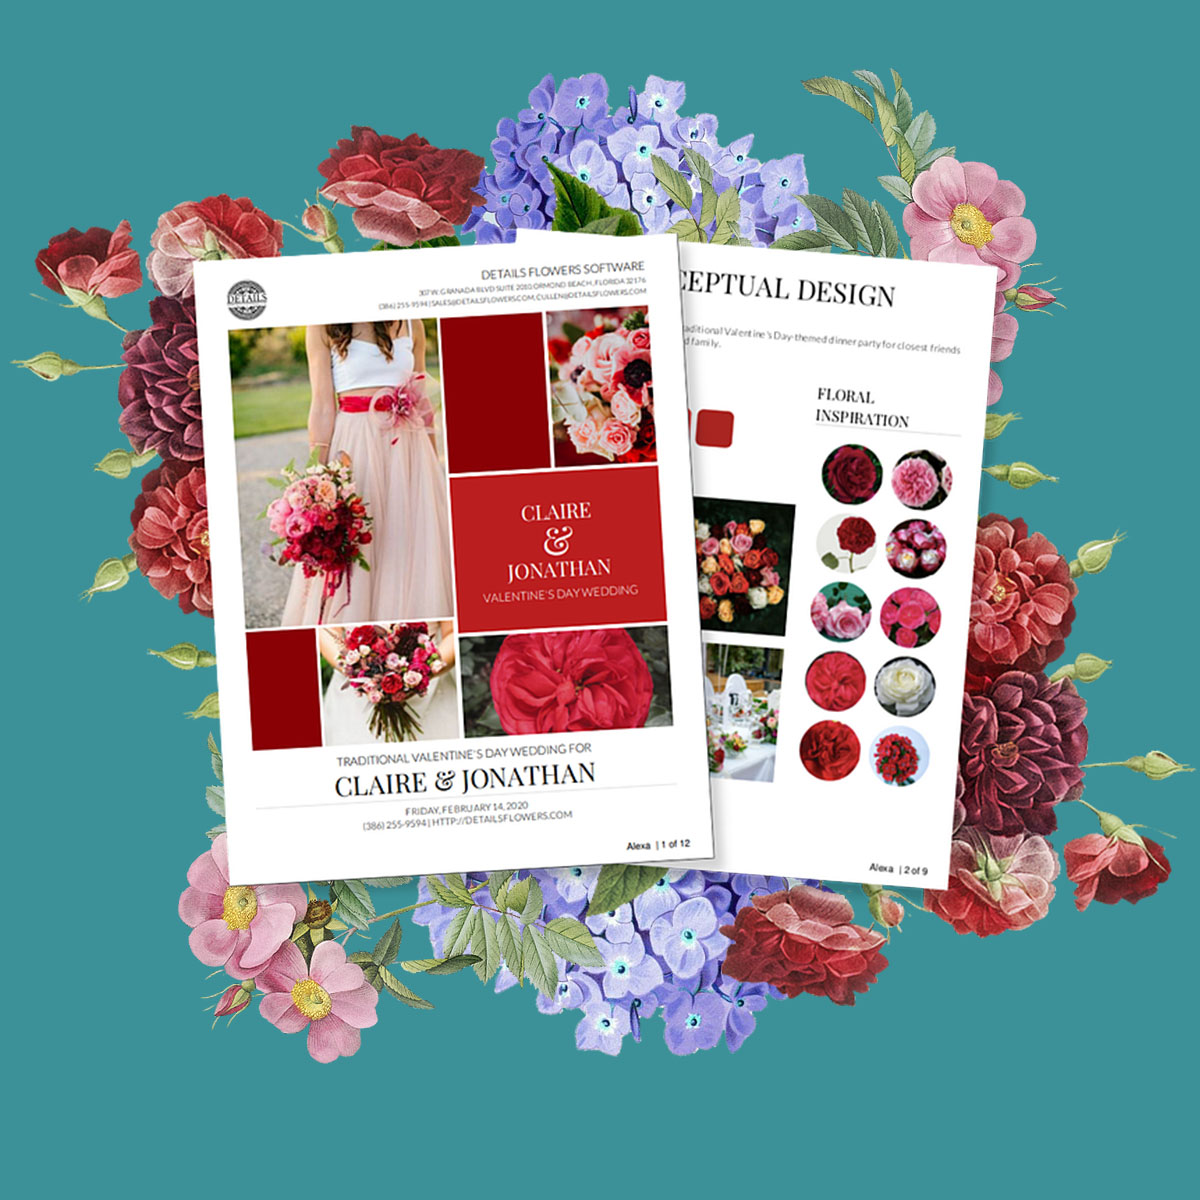 details-flowers-software-has-news-for-european-florists-and-designers-featured